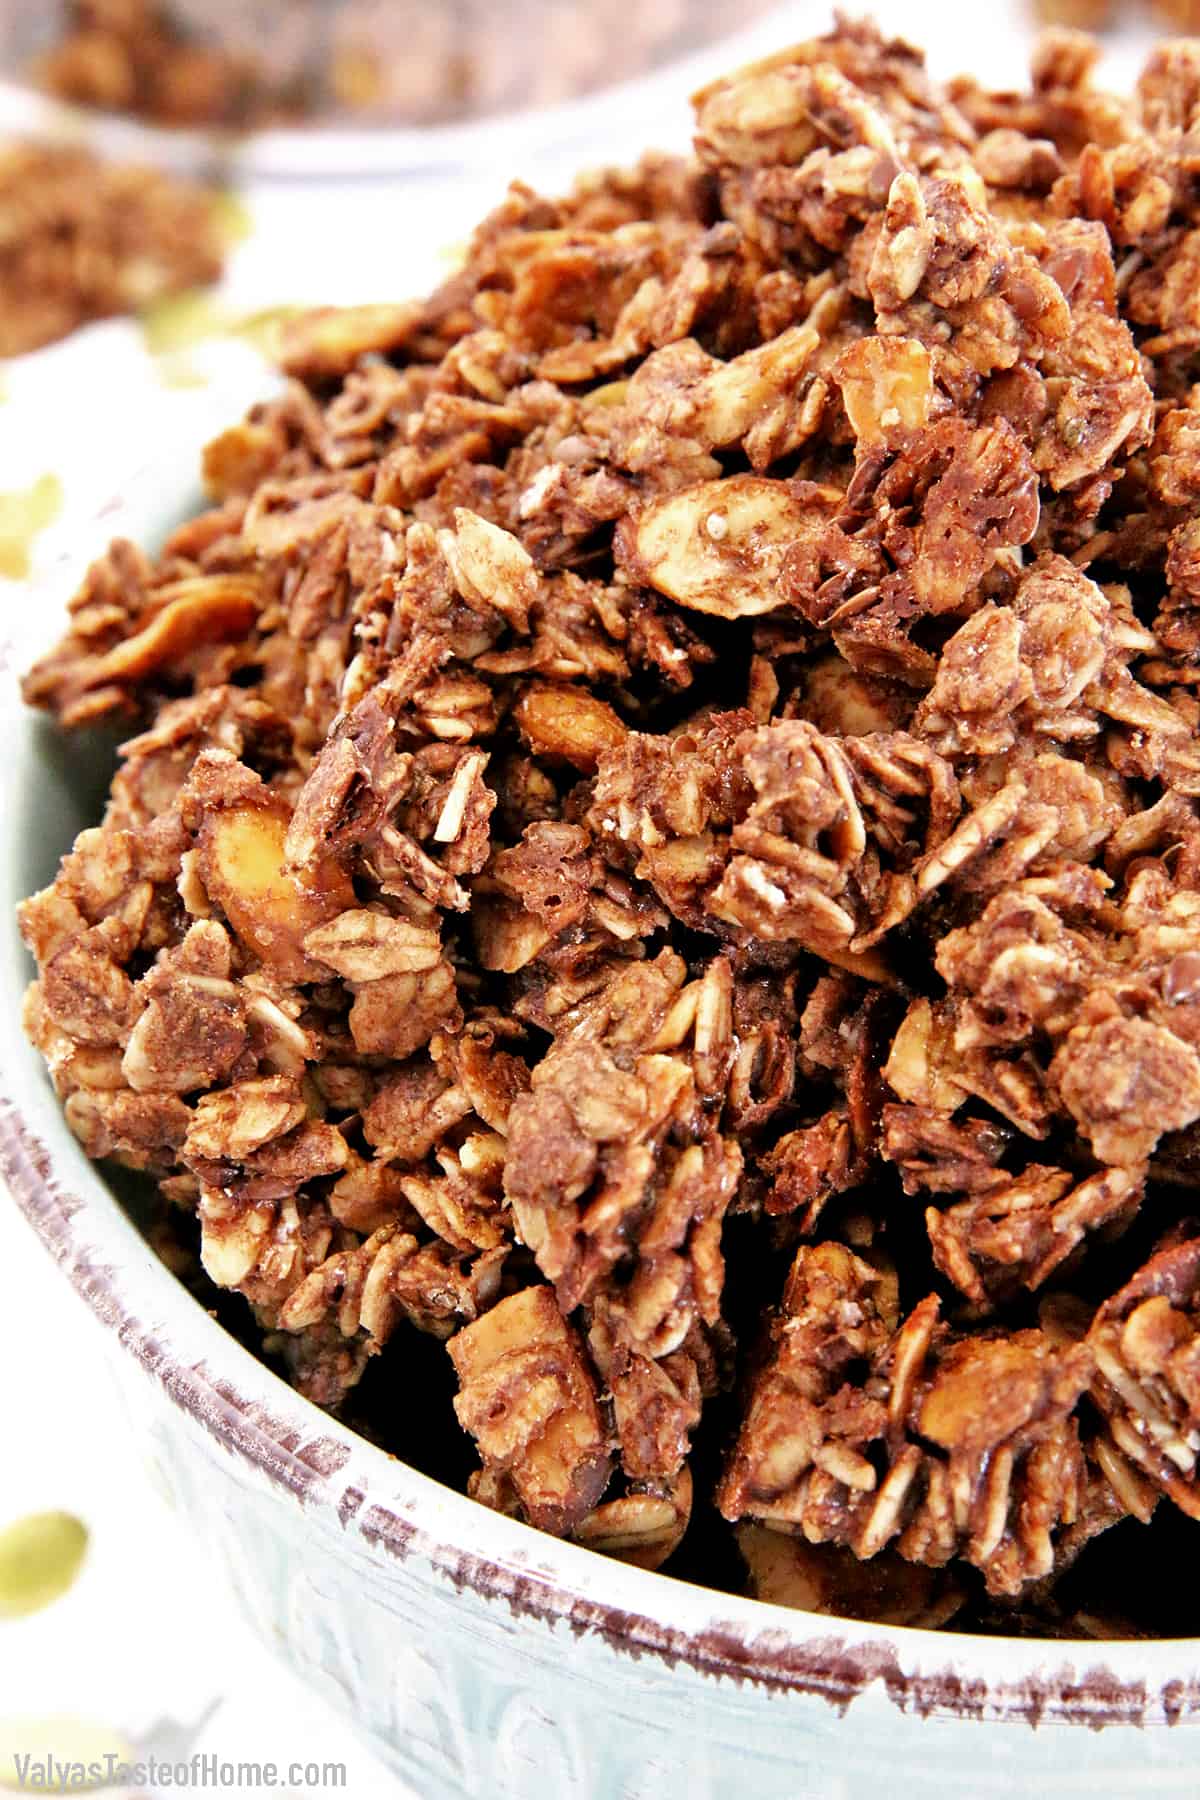 Do you like flavored granola? Are you still buying chocolate granola at the store? Did you know that it is super easy and much healthier to make it yourself at home? And the homemade version is unbeatable. This is The Best Healthy Dark Chocolate Granola Recipe you'll ever try! And also clean, fresh, and healthy. 